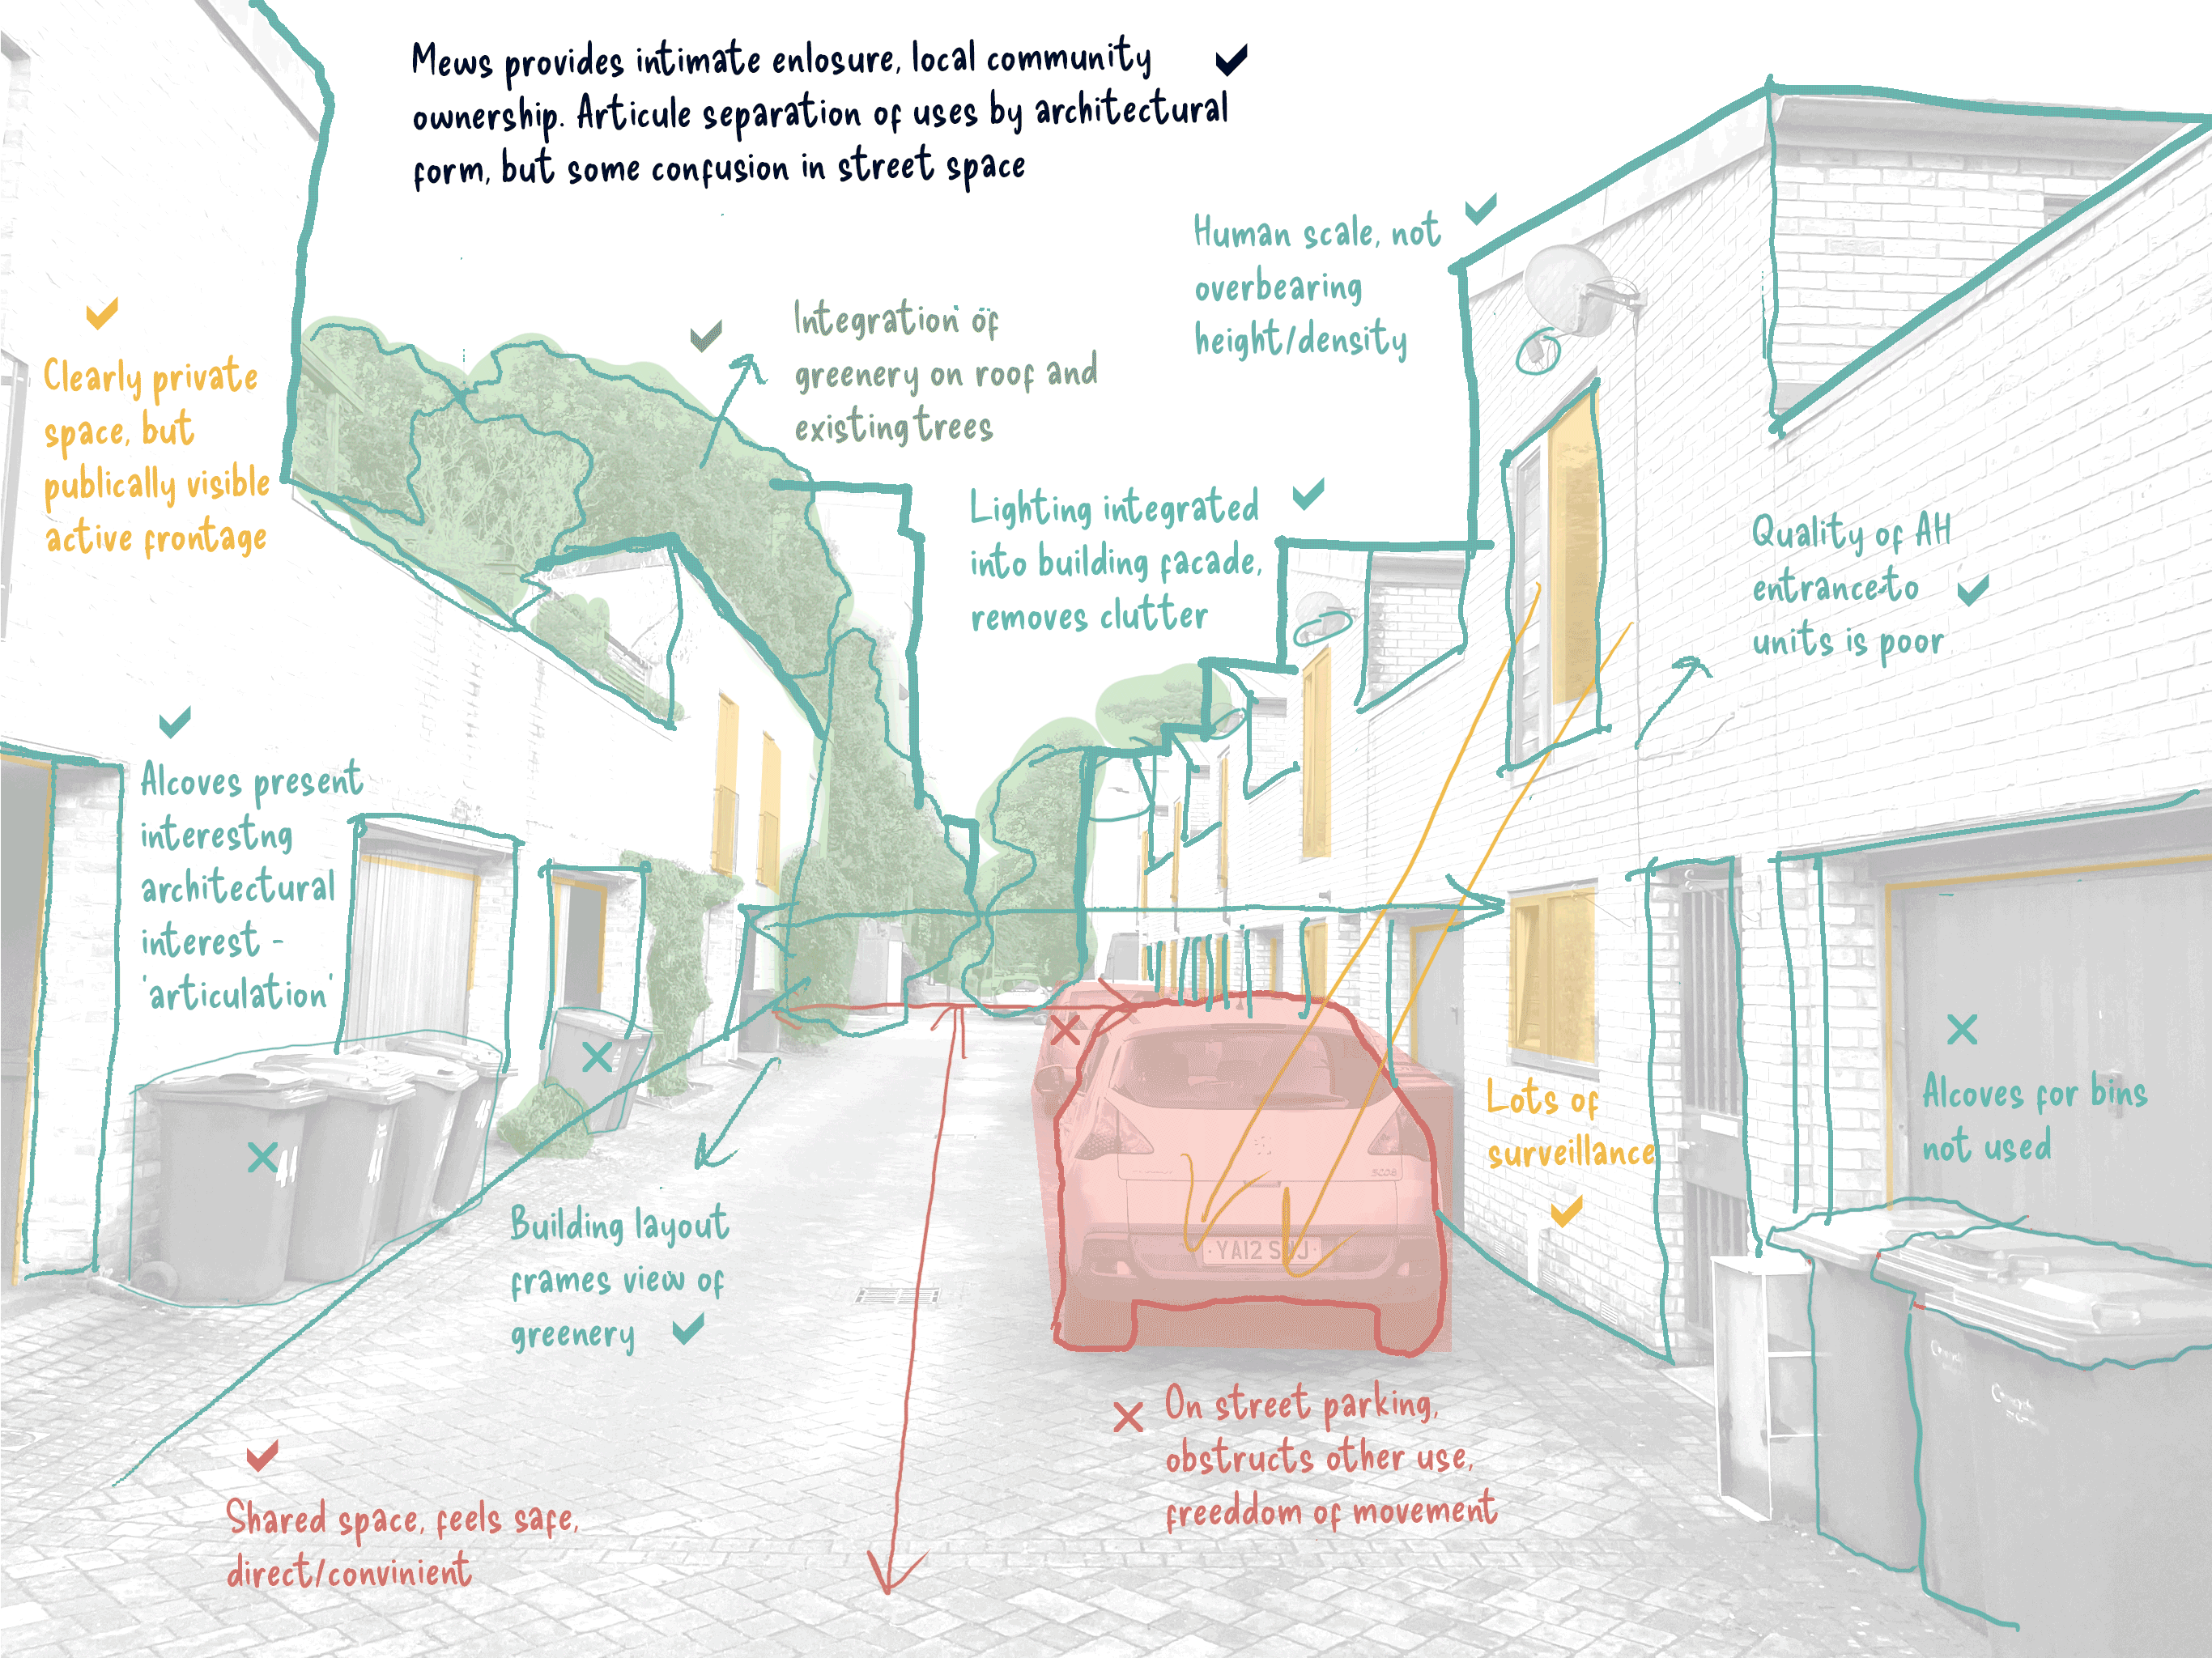 Place Analysis of a local Street in Accordia, that transitions into the original photo